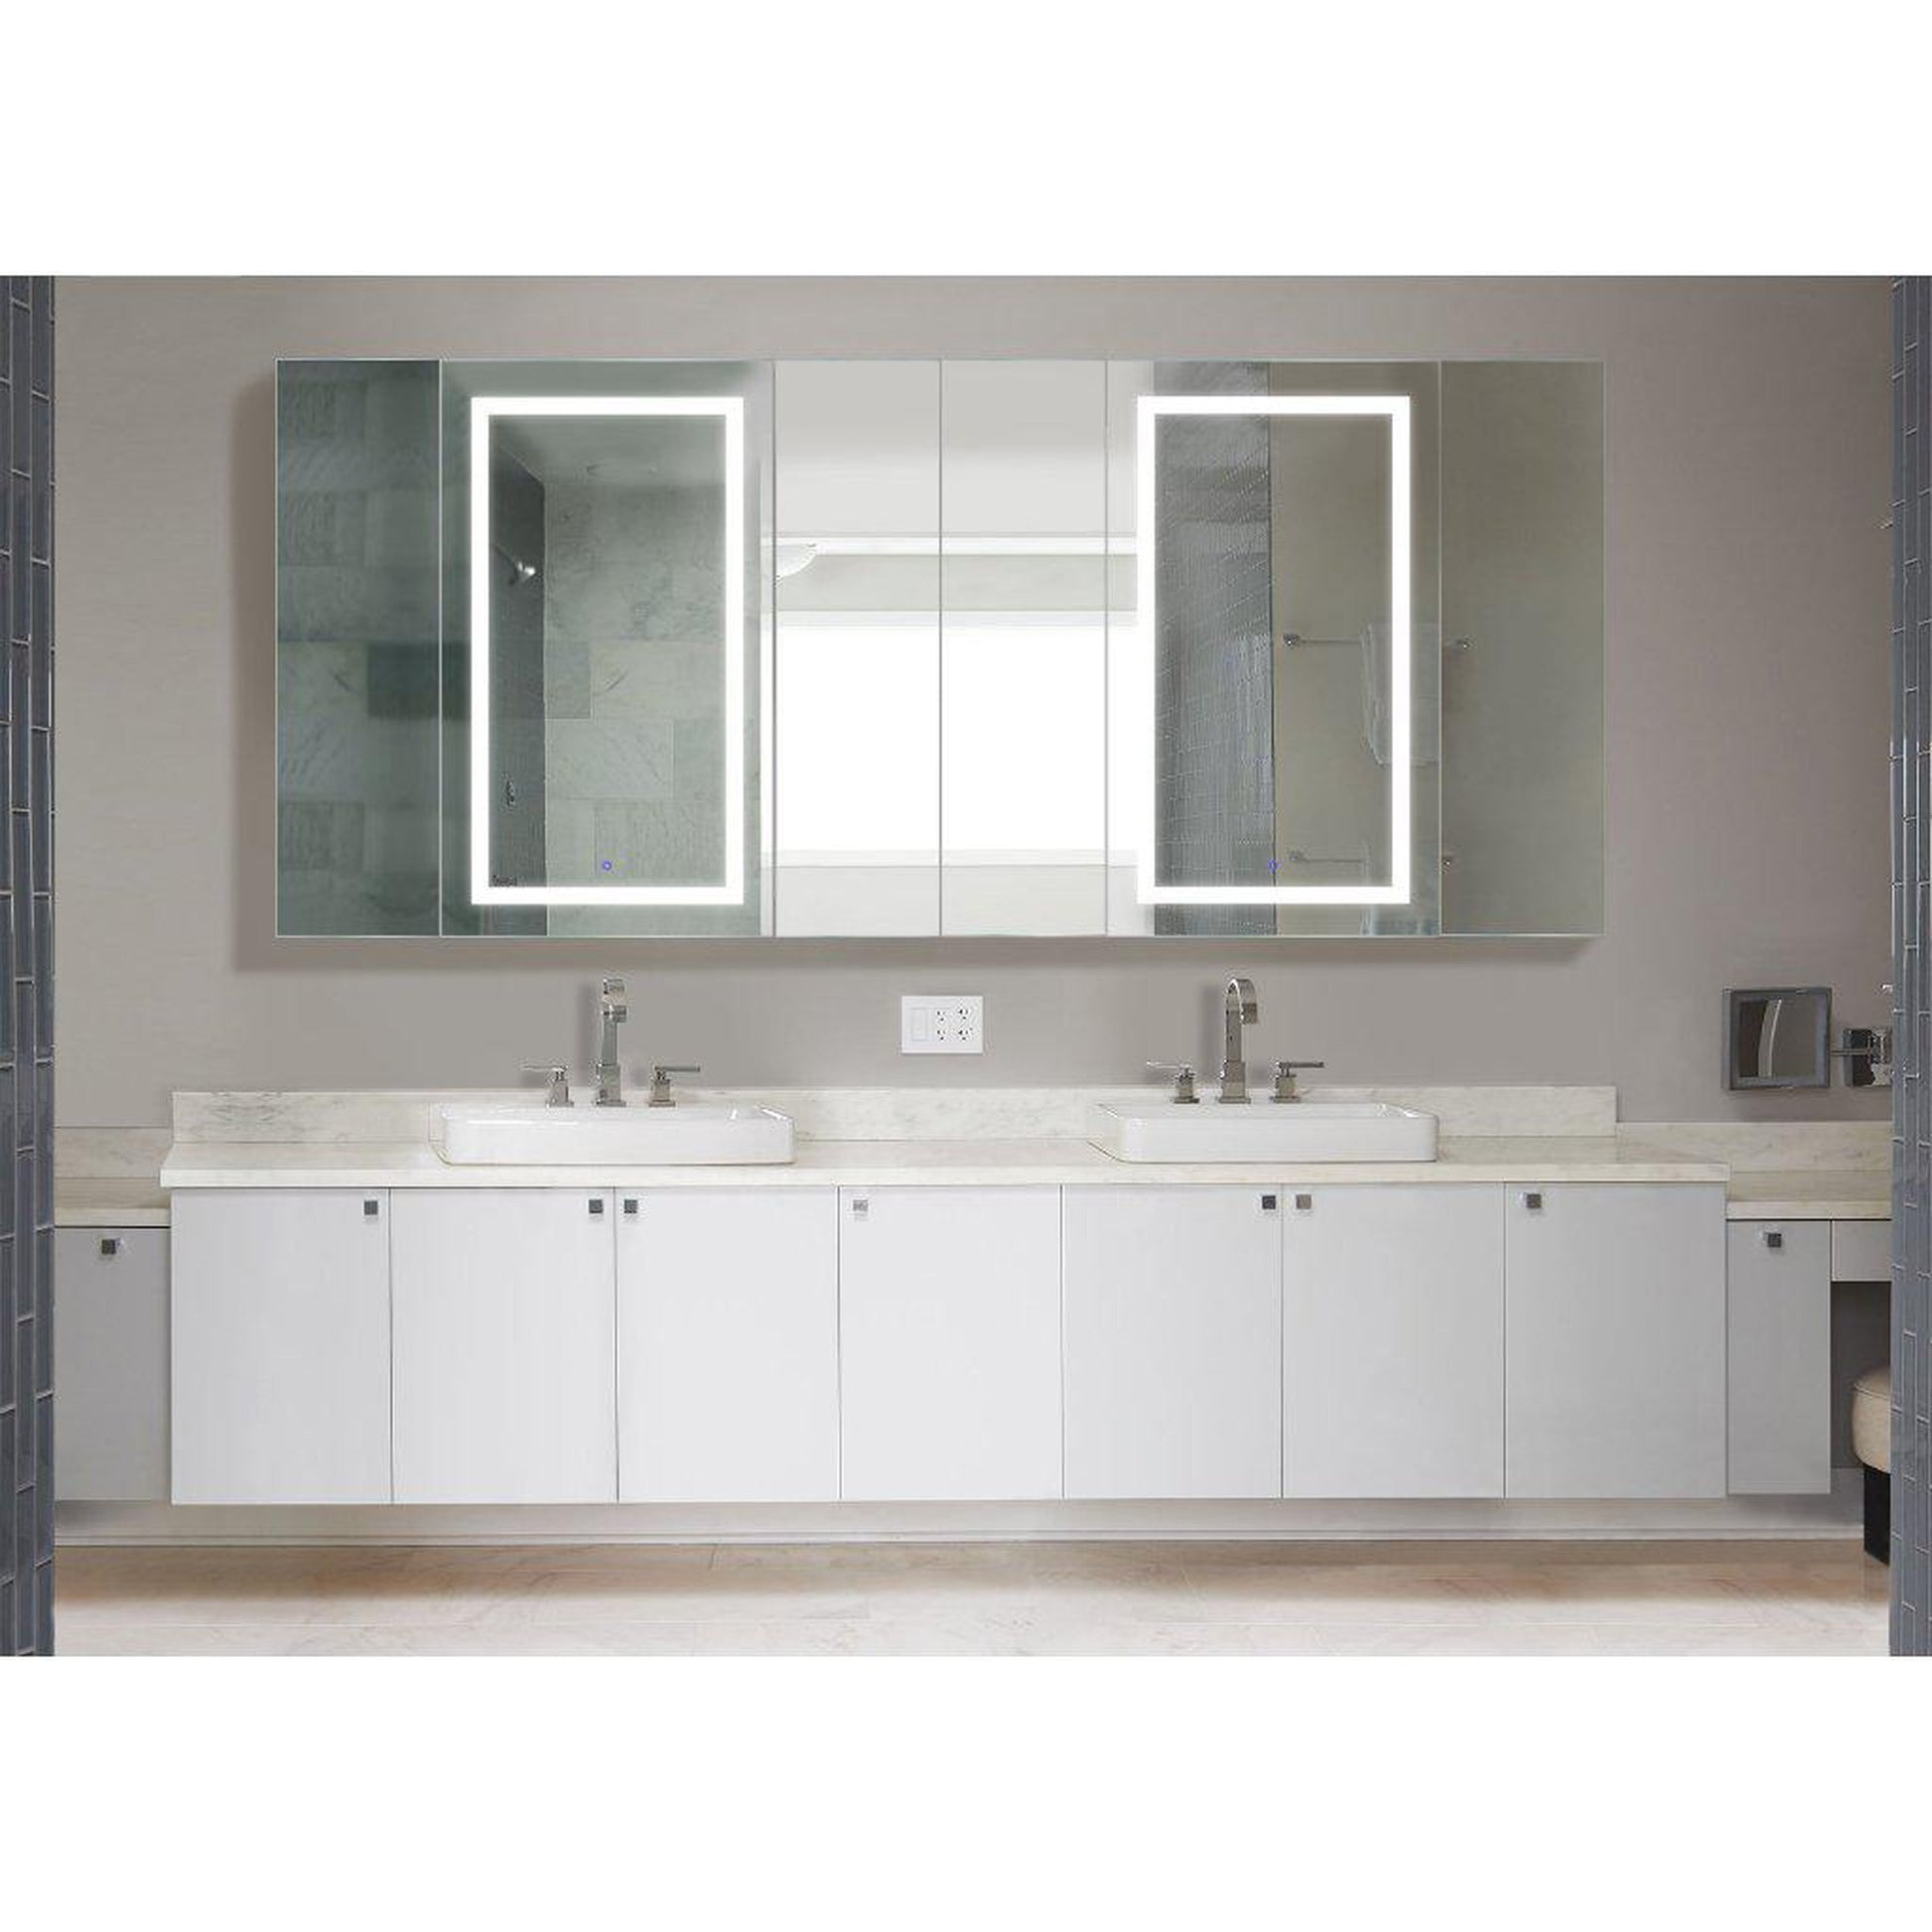 Krugg Reflections Svange 96" x 42" 5000K Double Hexa-View Left-Left-Left-Right-Right-Right Opening Recessed/Surface-Mount Illuminated Silver Backed LED Medicine Cabinet Mirror With Built-in Defogger, Dimmer and Electrical Outlet